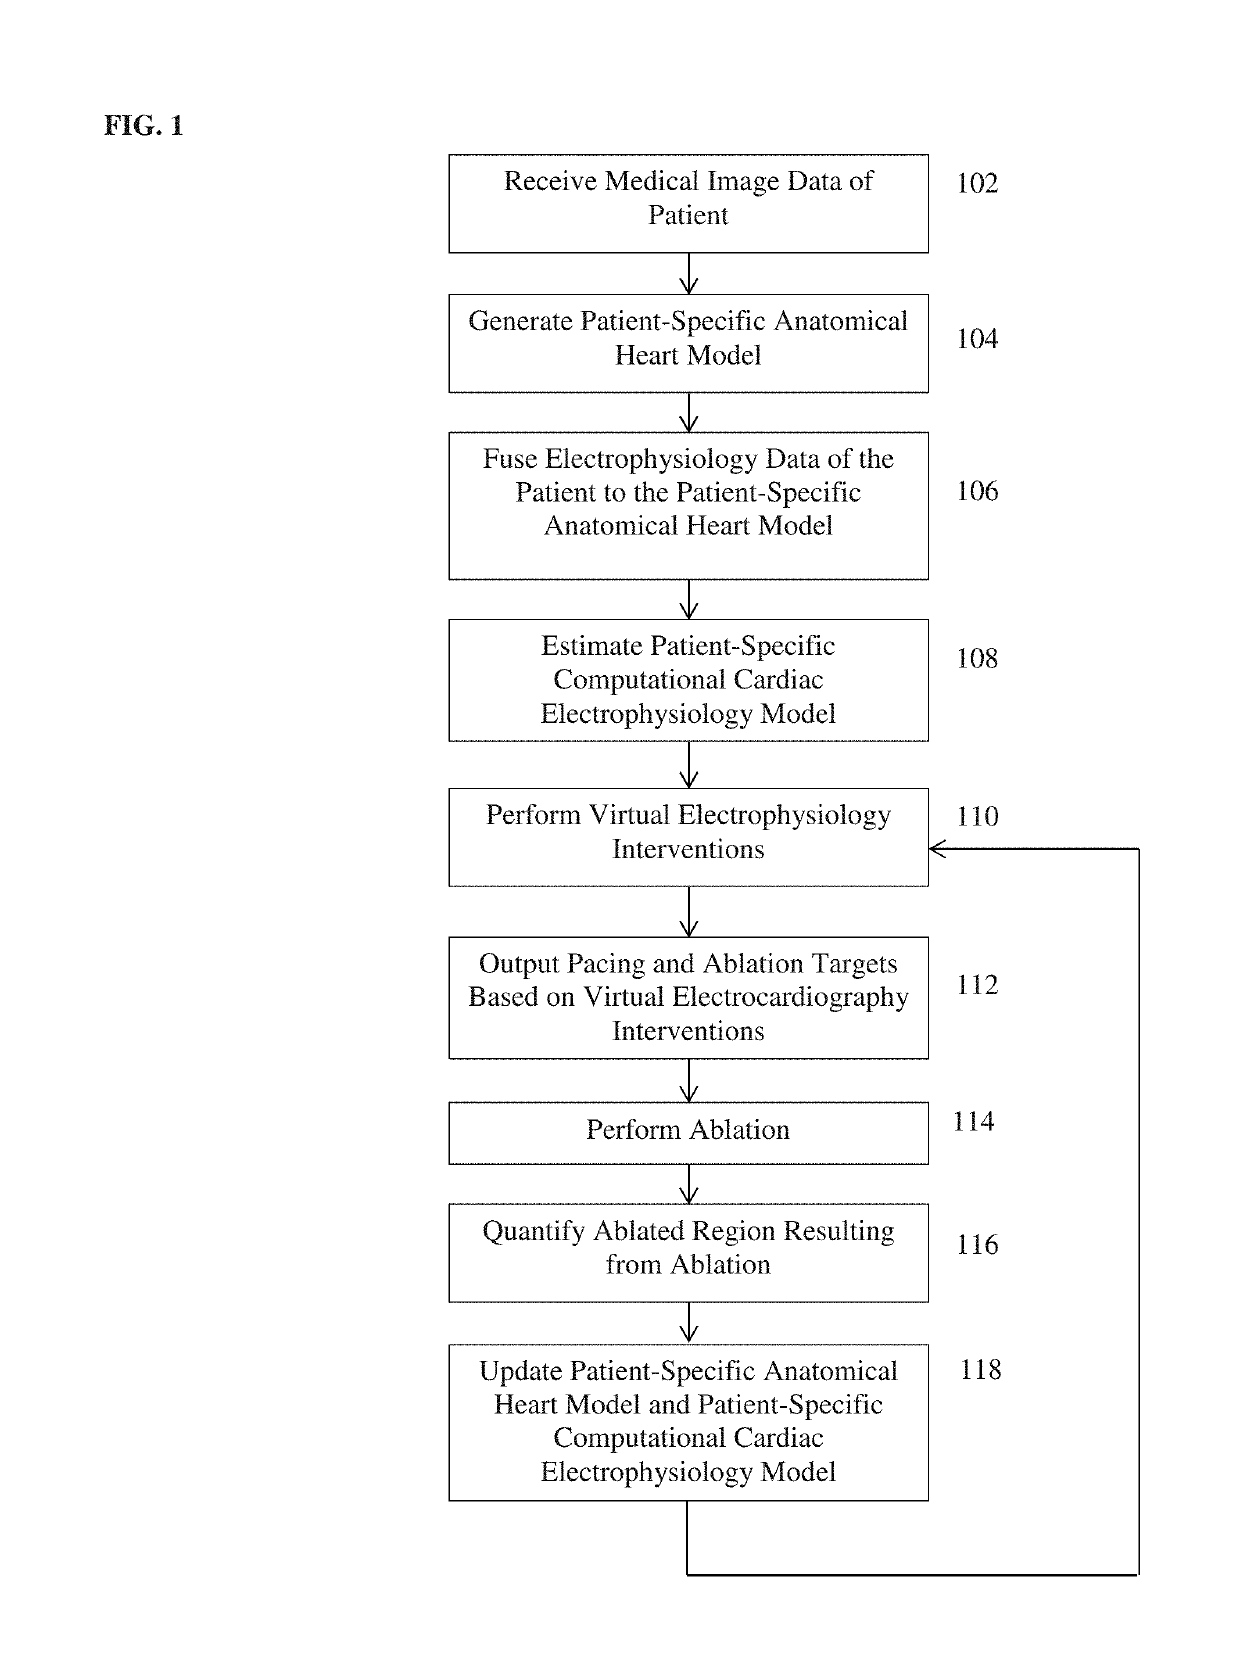 System and method for patient-specific image-based guidance of cardiac arrhythmia therapies